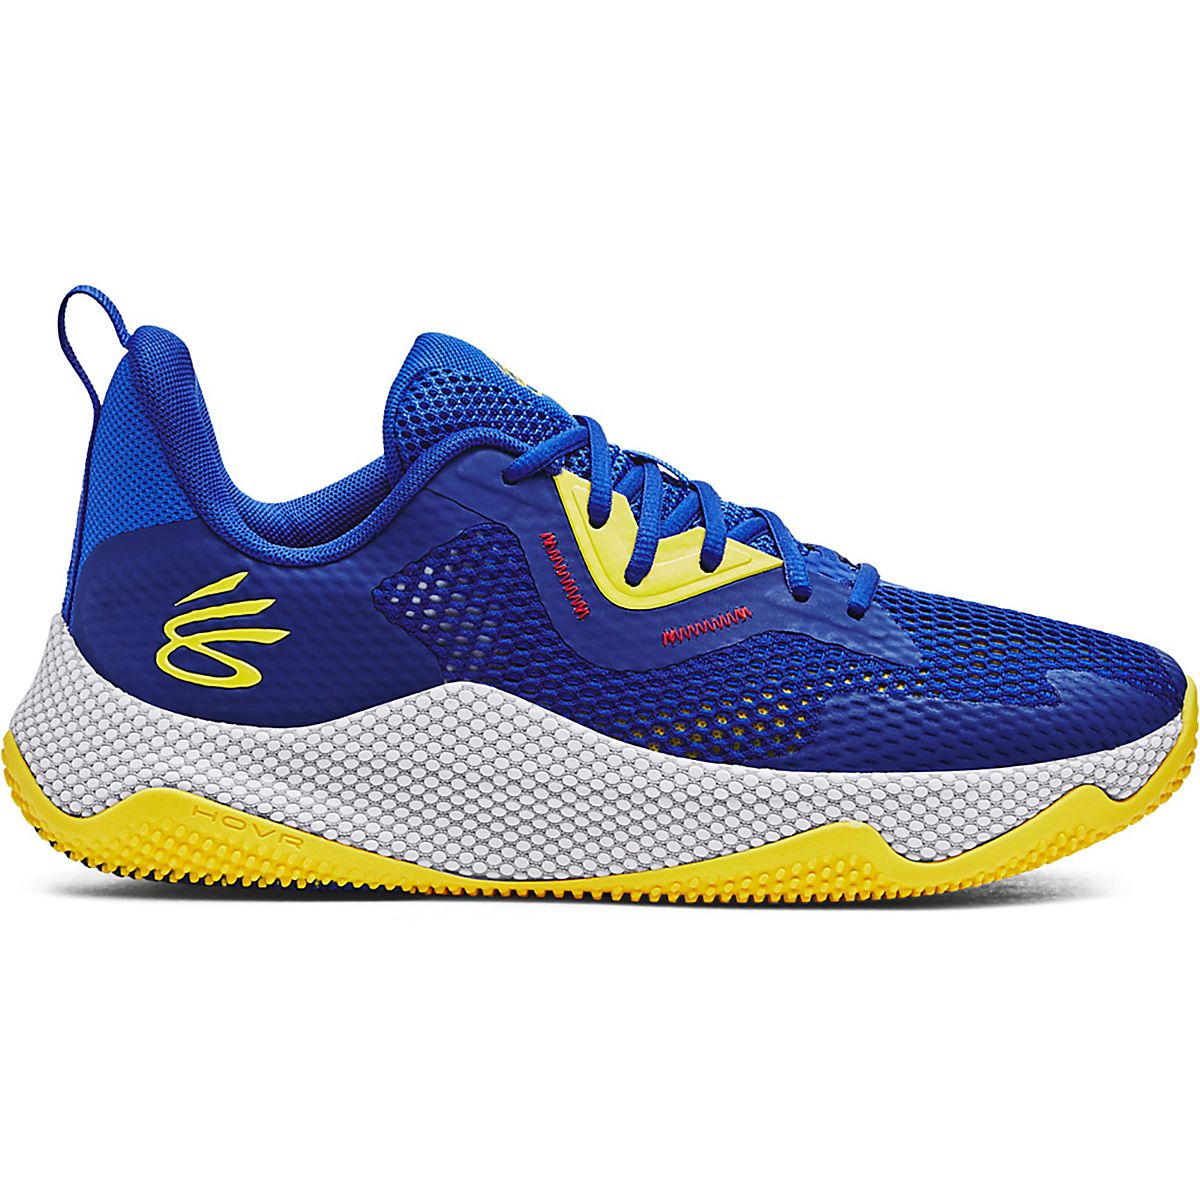 Under Armour Men's Curry HOVR Splash 3 Basketball Shoes | Academy